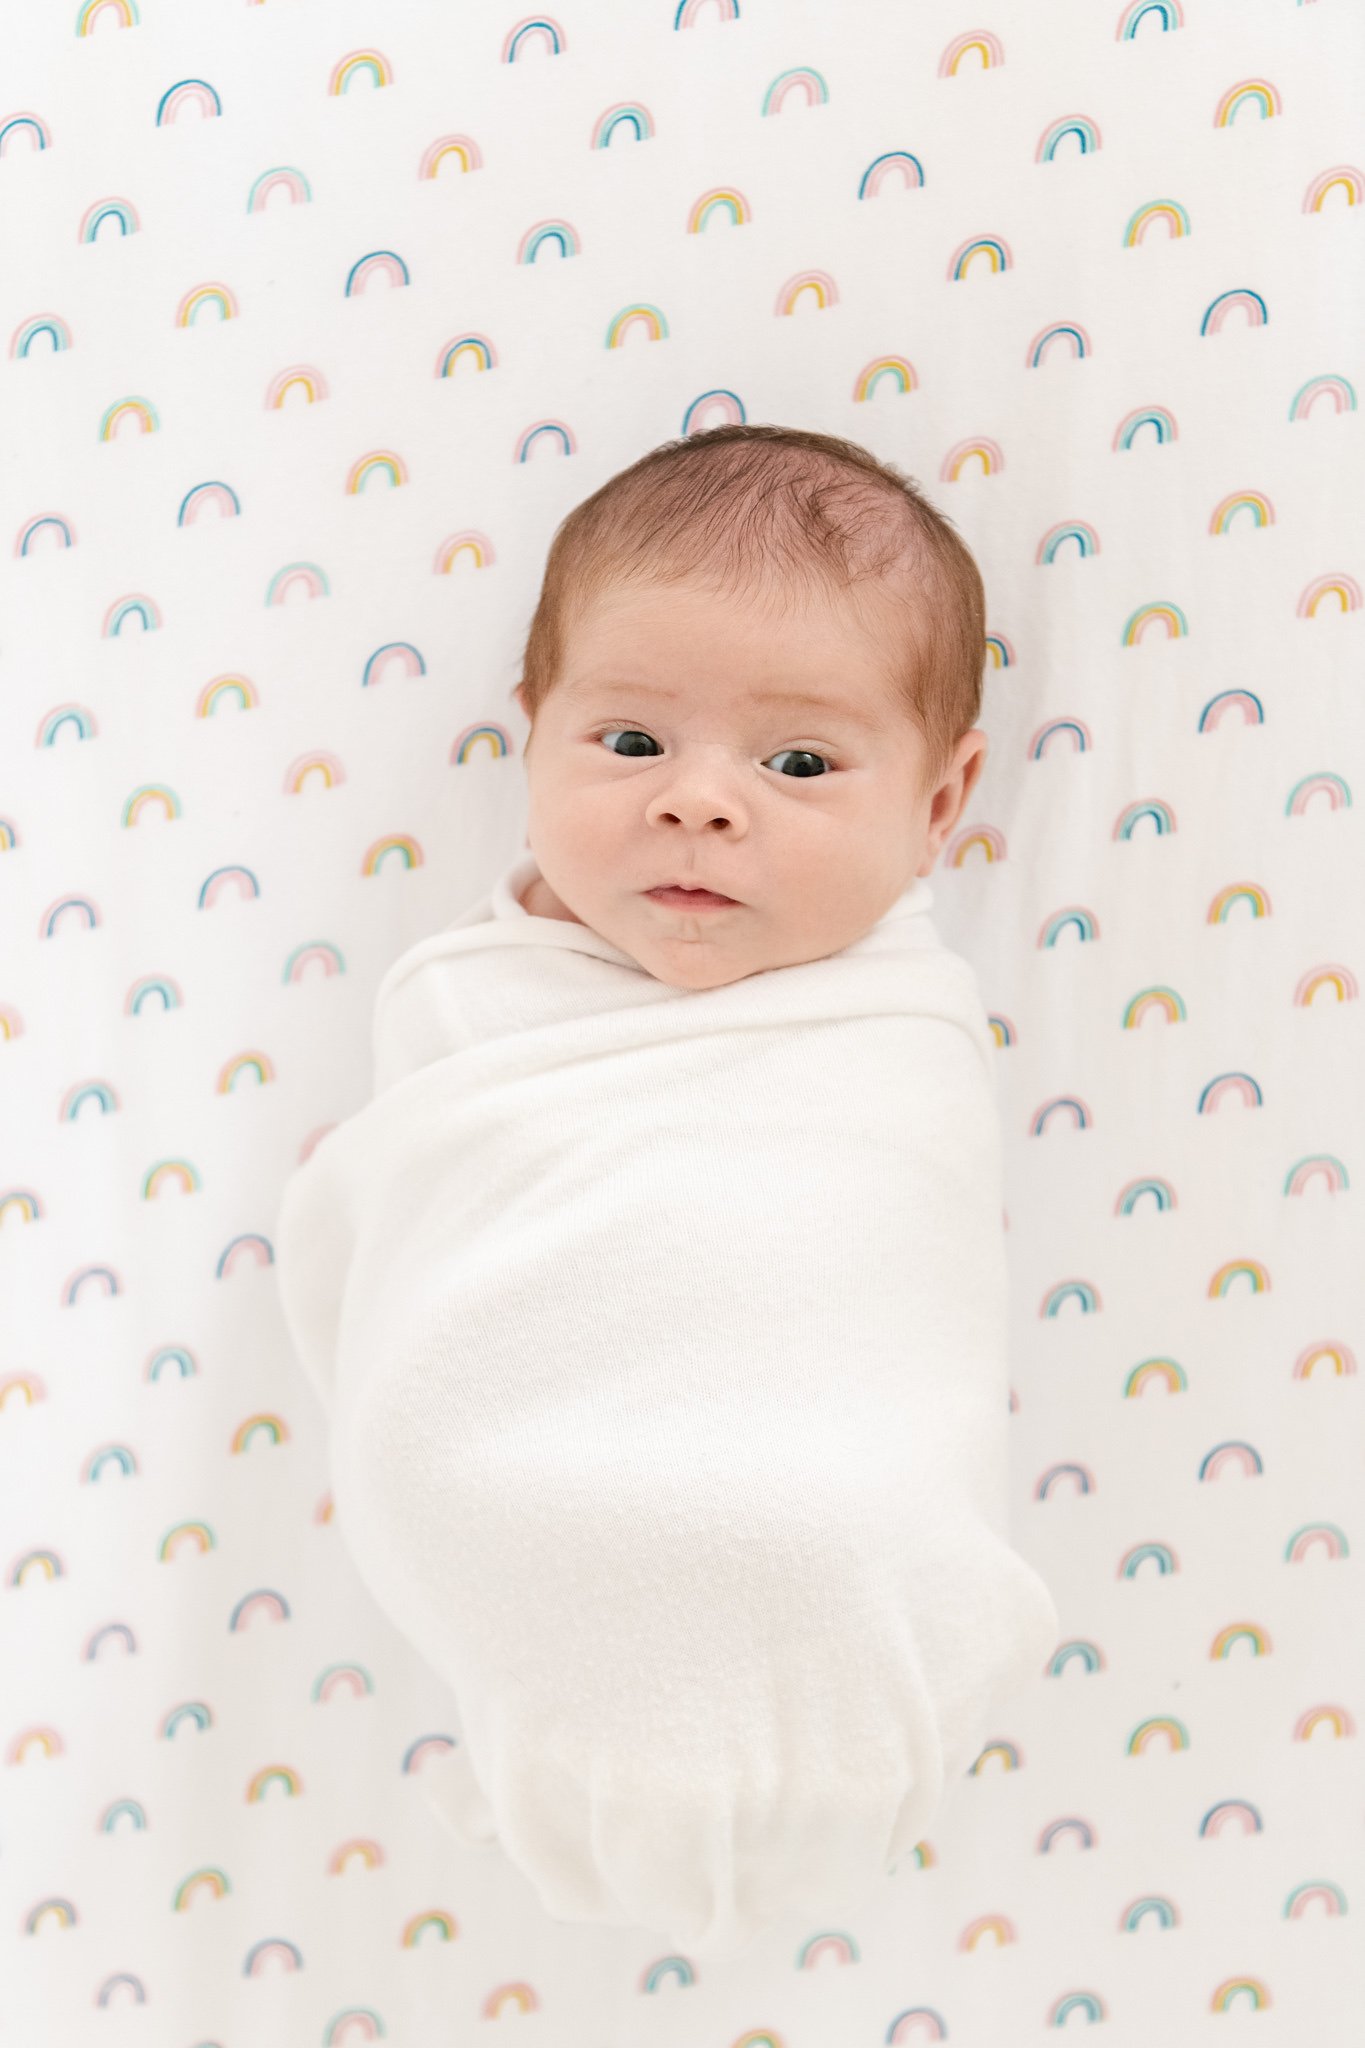  A baby girl lays swaddled up in her crib at her home during a newborn session with Nicole Hawkins Photography. baby on rainbow sheets swaddled baby girl #NicoleHawkinsPhotography #NicoleHawkinsNewborns #Babygirl #inhomenewbornsNJ #homenewbonportrait